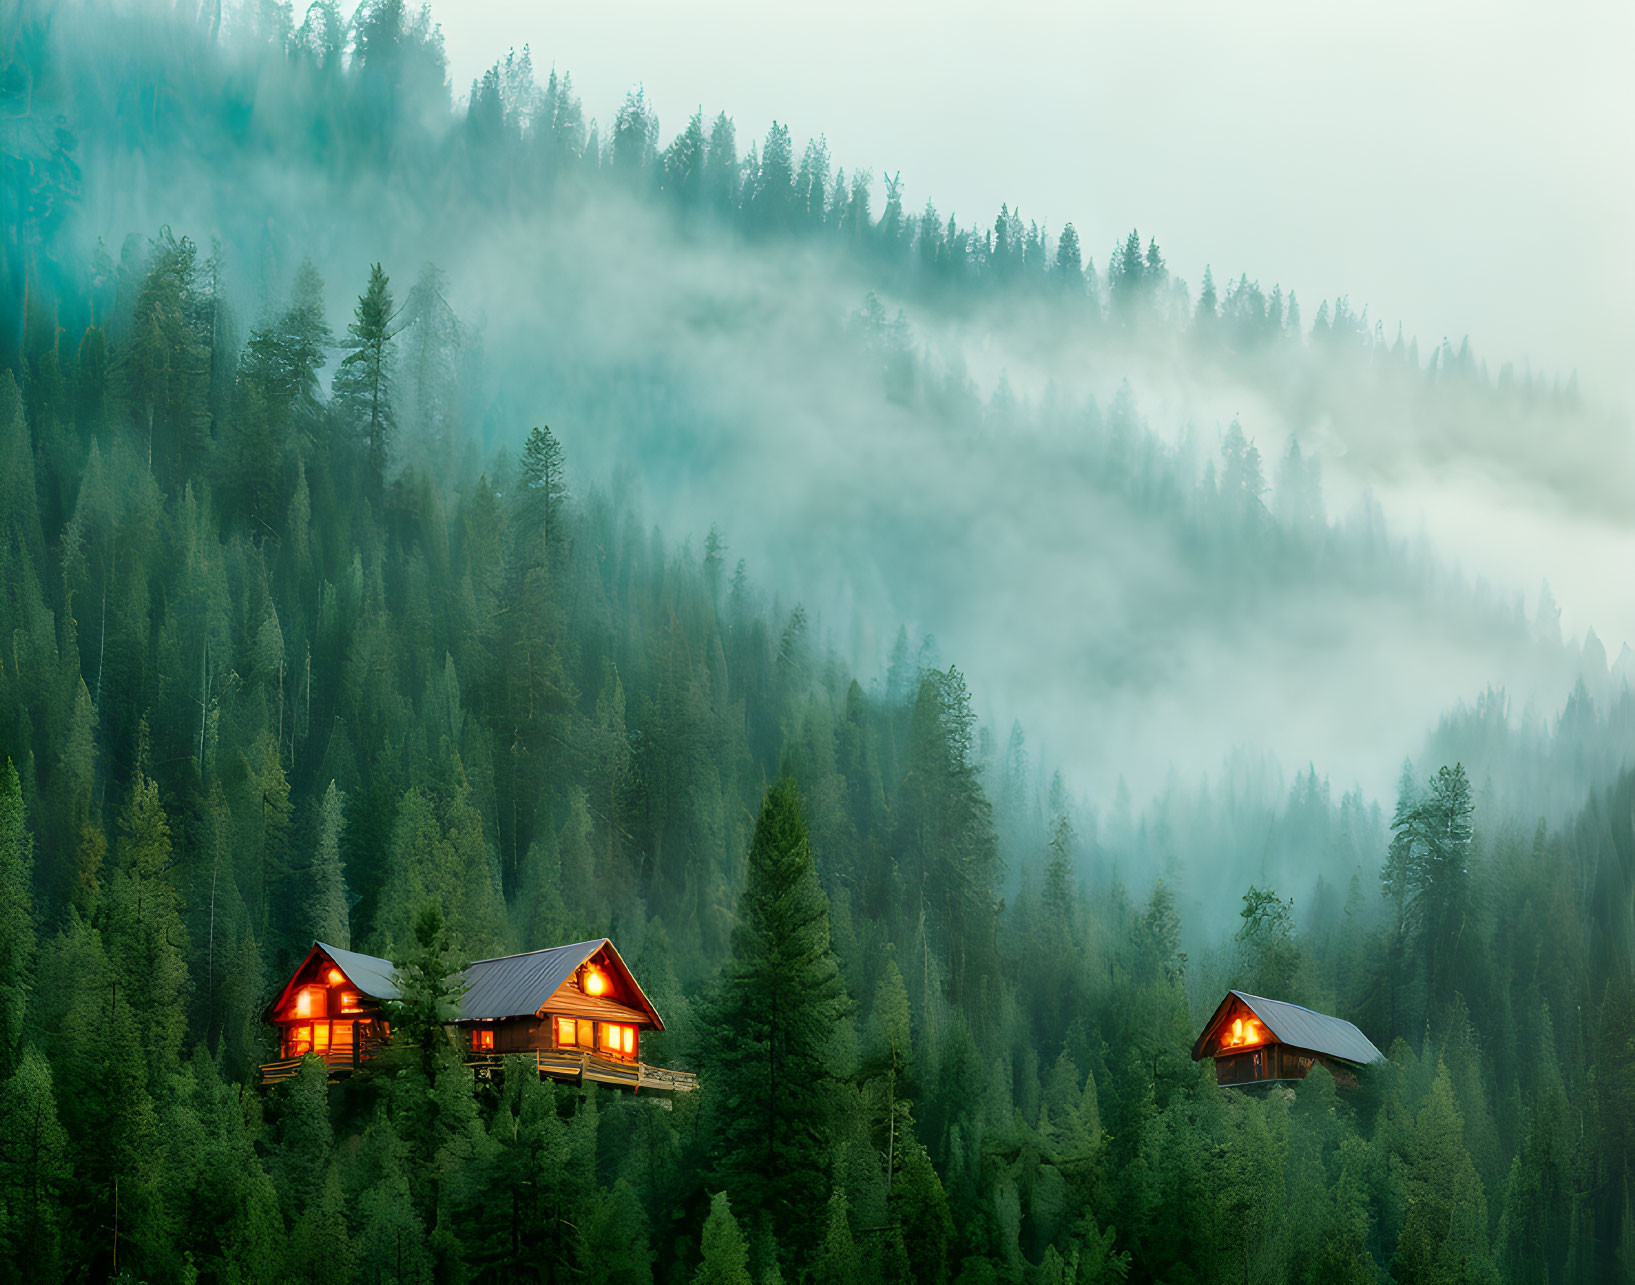 Illuminated cabins in misty forested mountain landscape